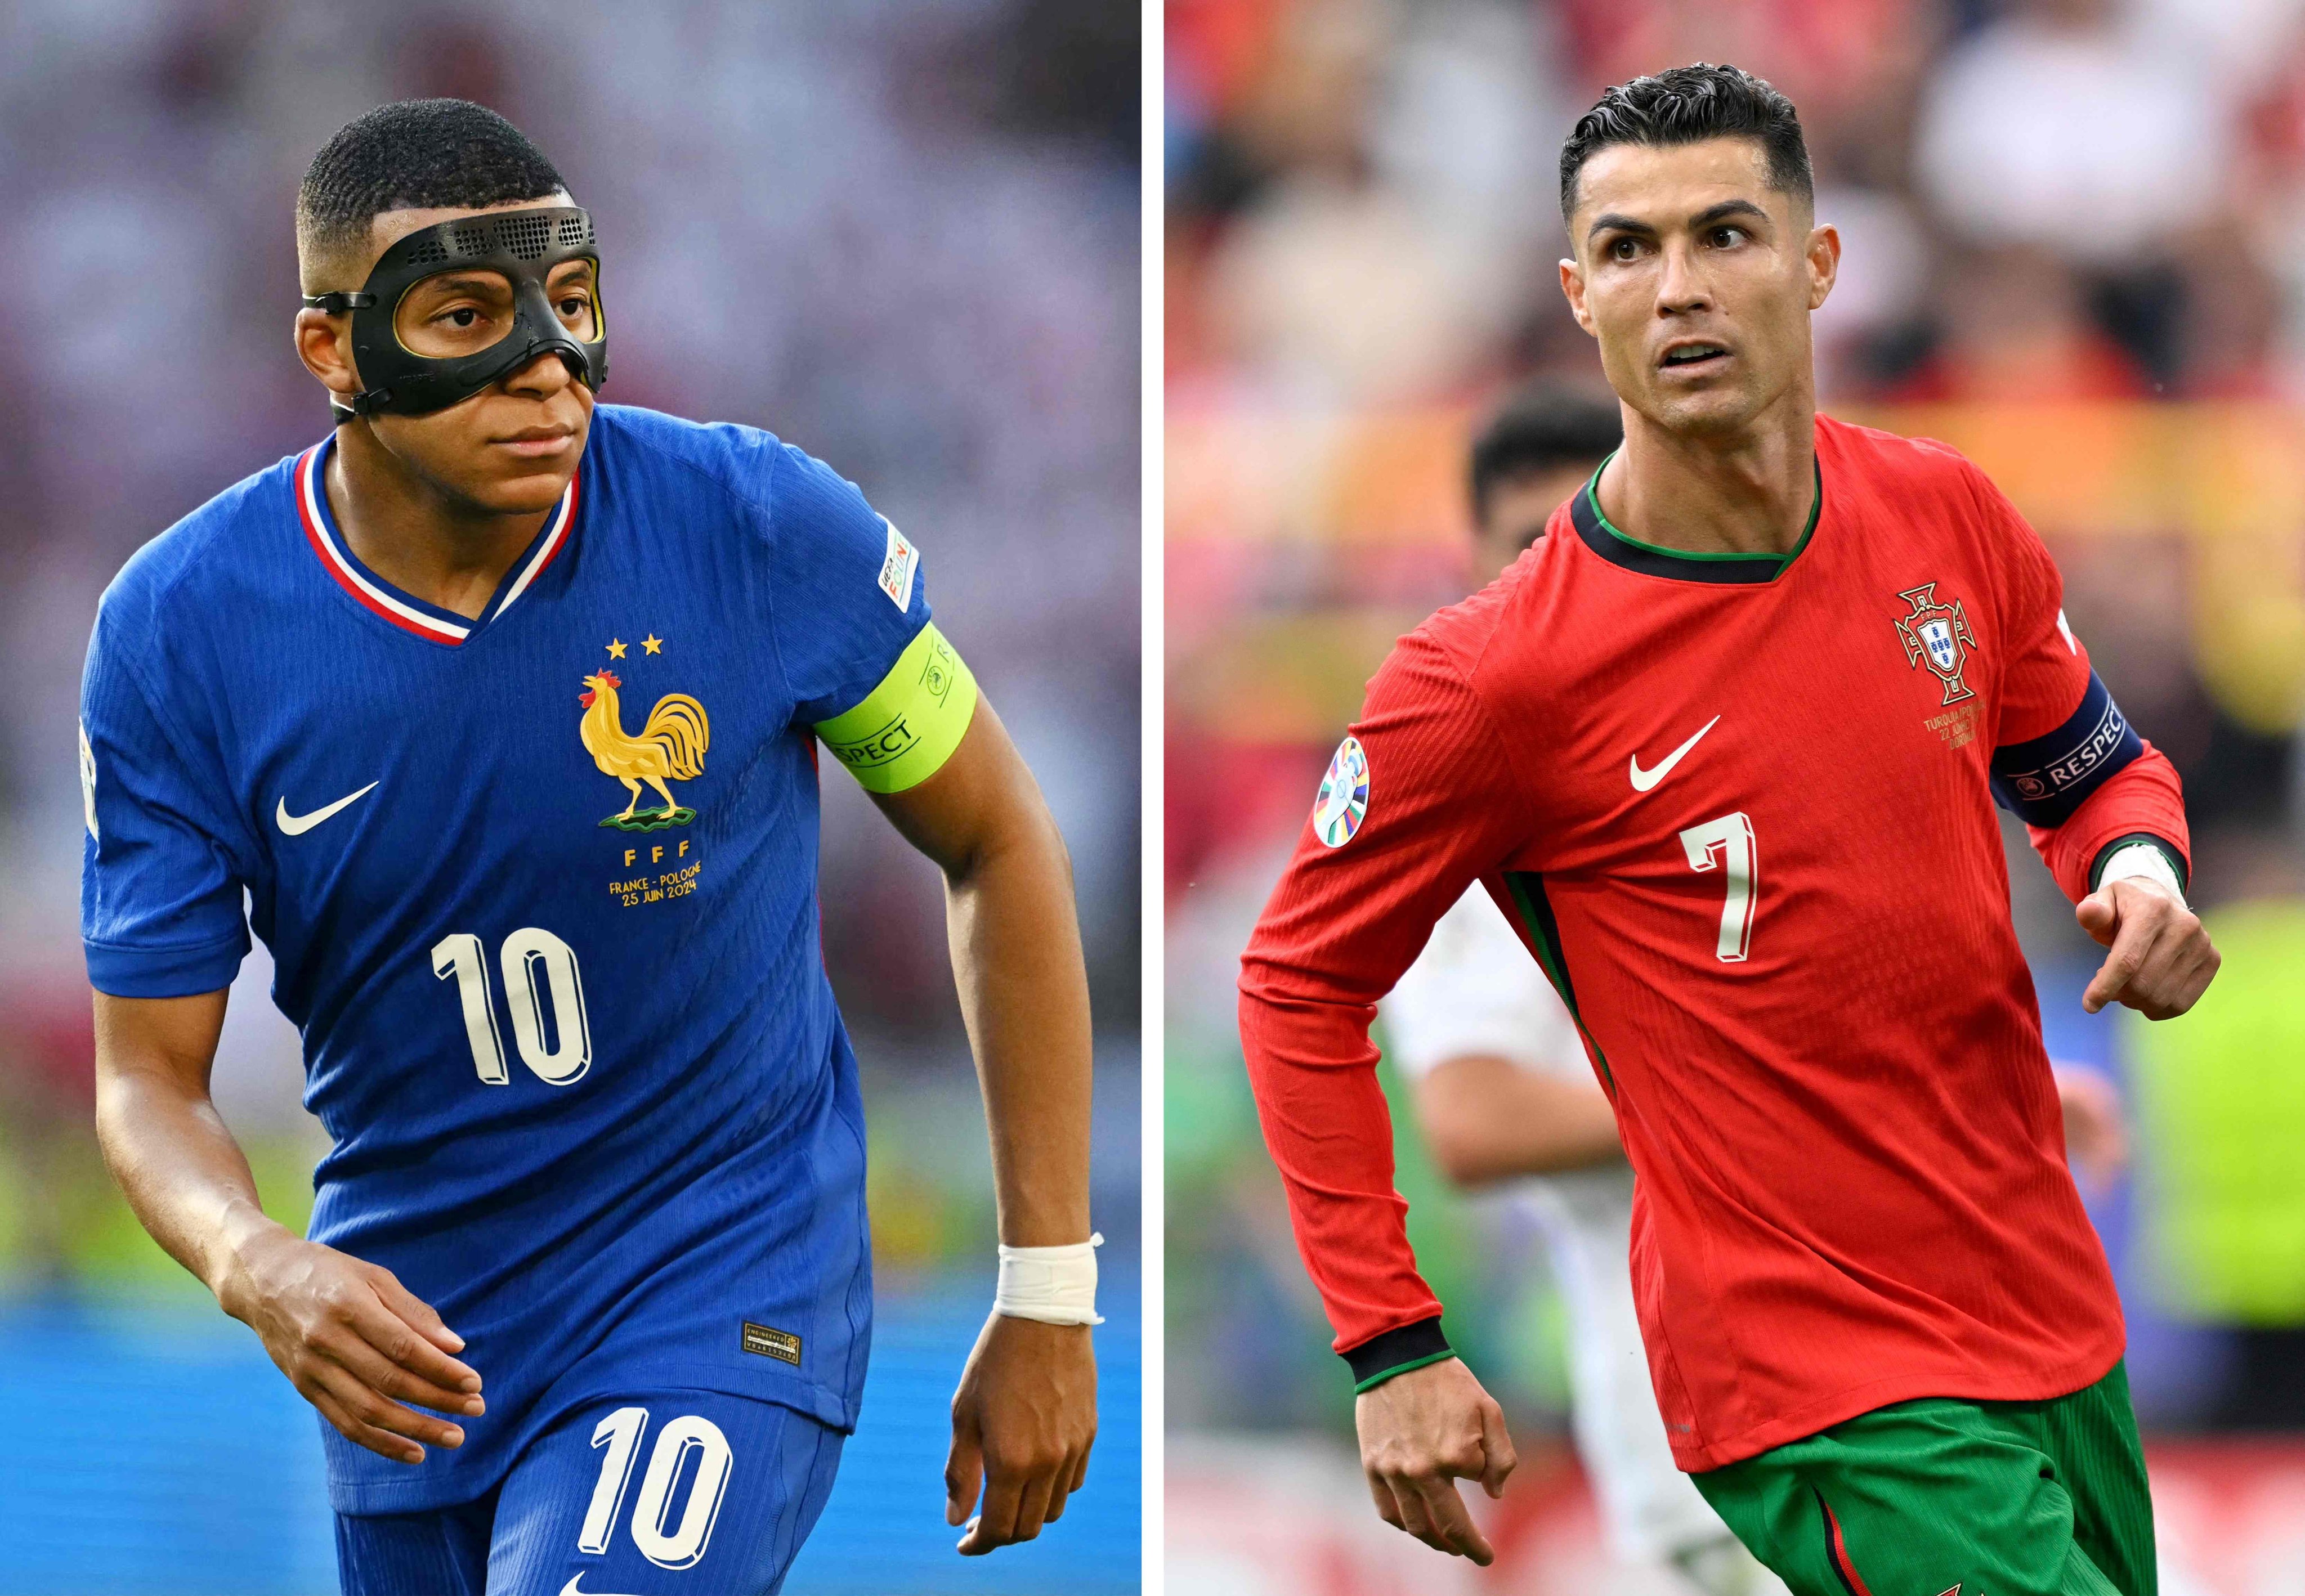 Kylian Mbappé‘s France will face Cristiano Ronaldo’s Portugal in the last eight. Photo: AFP